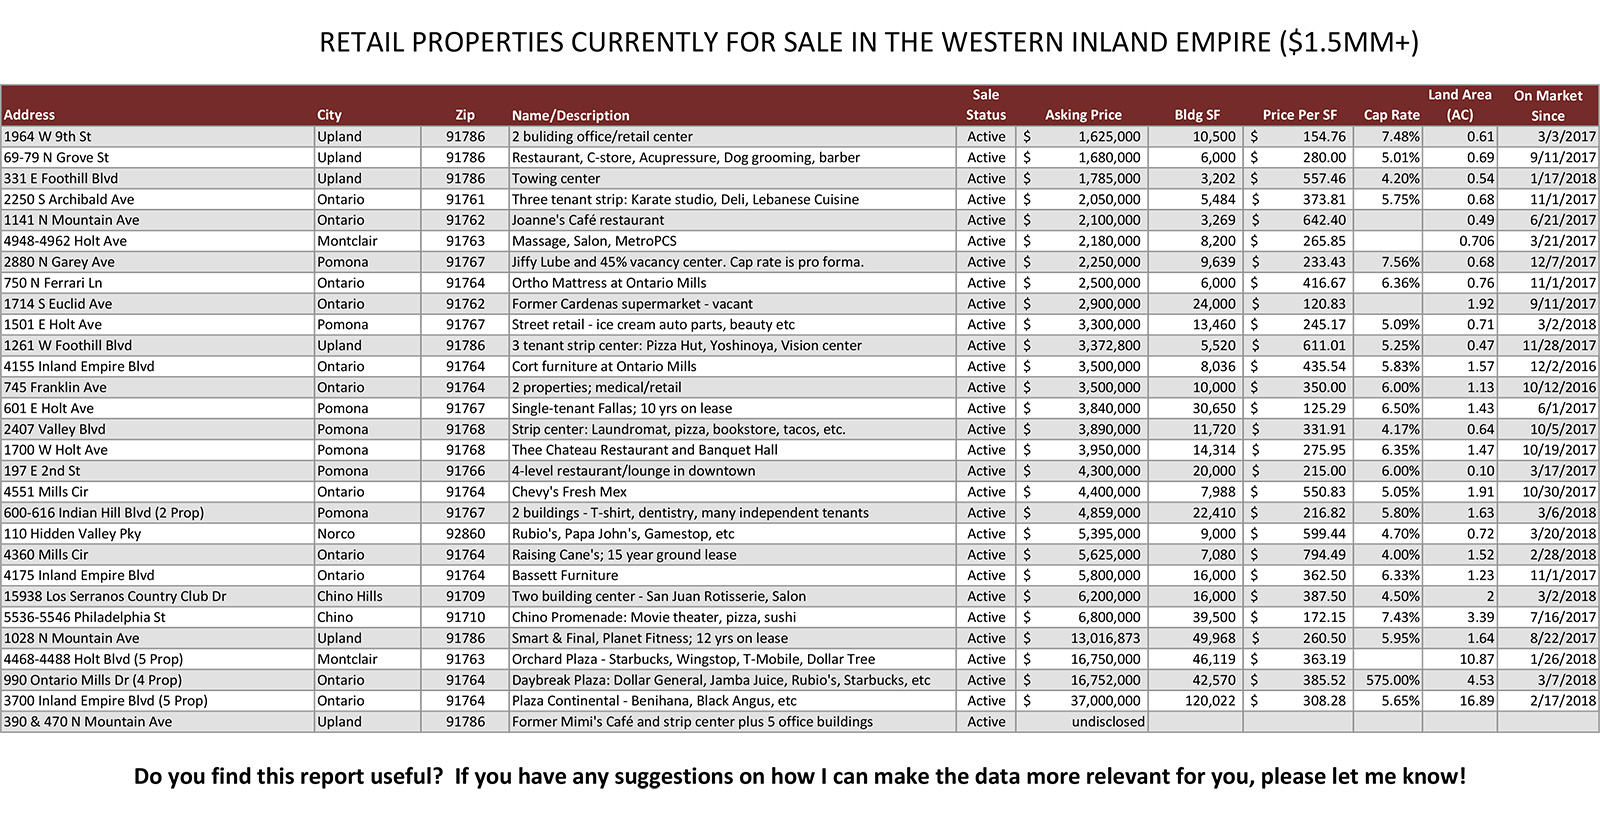 Retail property sold